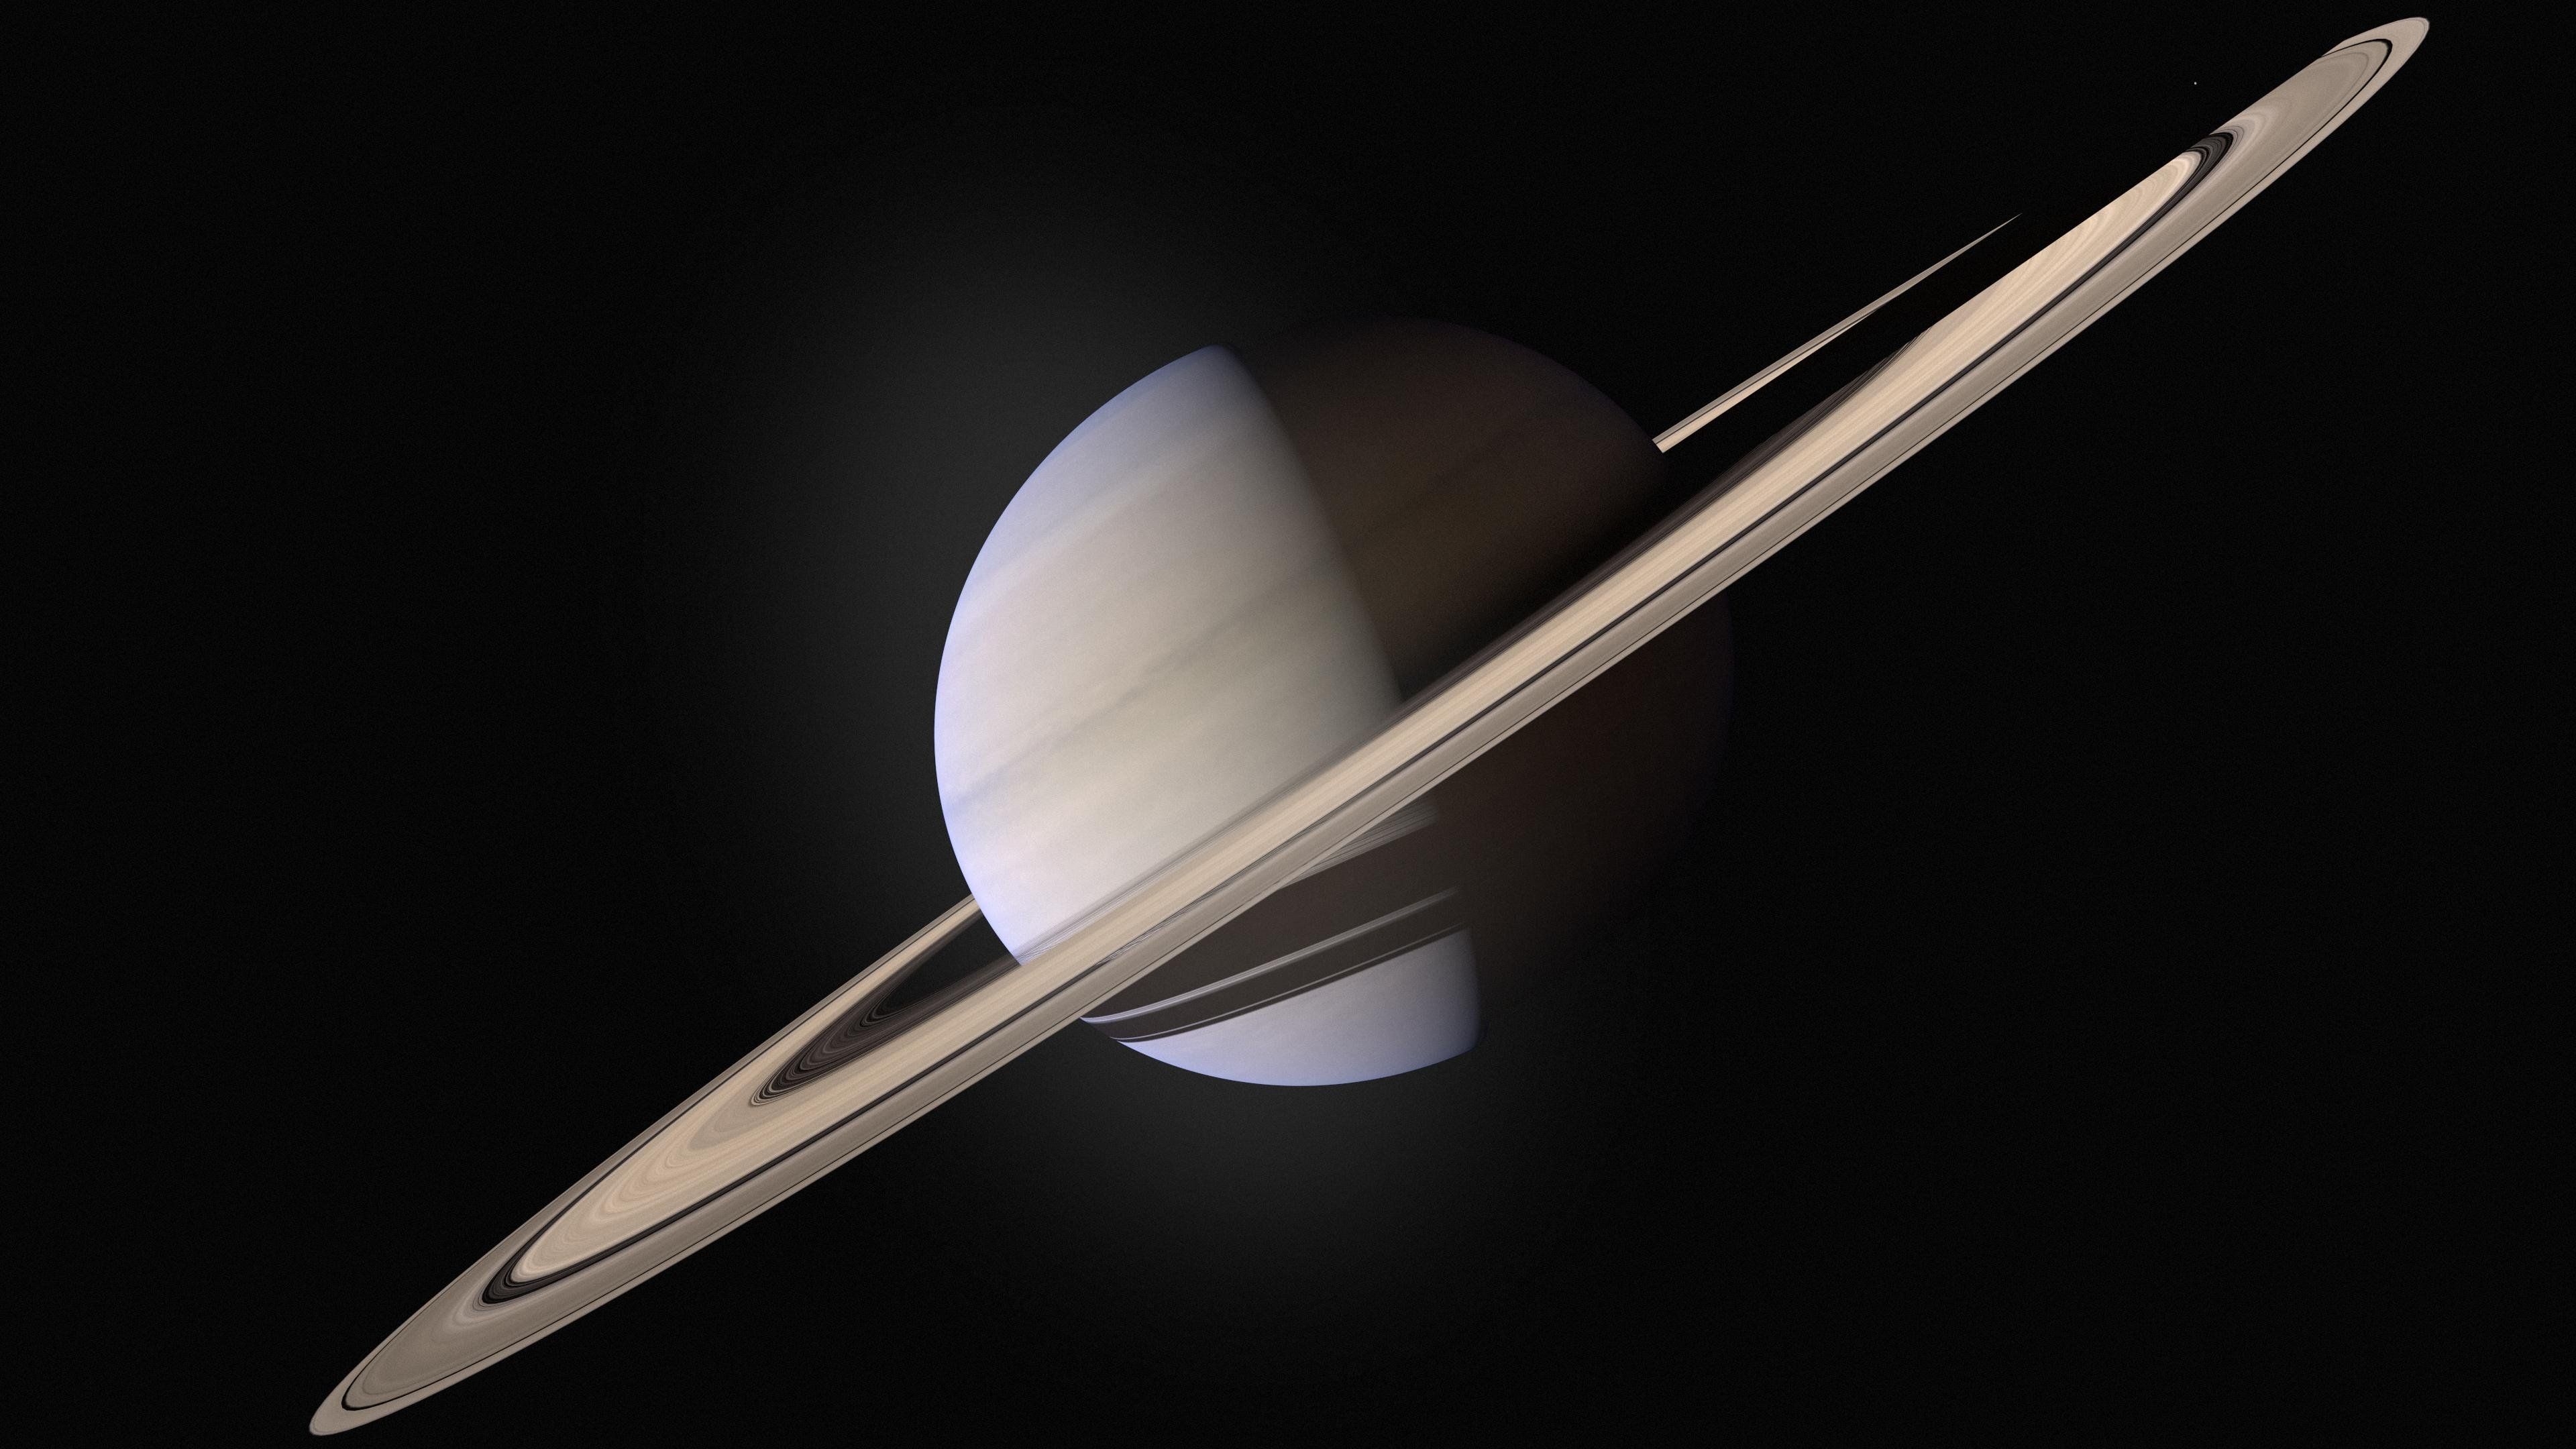 Saturn 4K wallpaper for your desktop or mobile screen free and easy to download